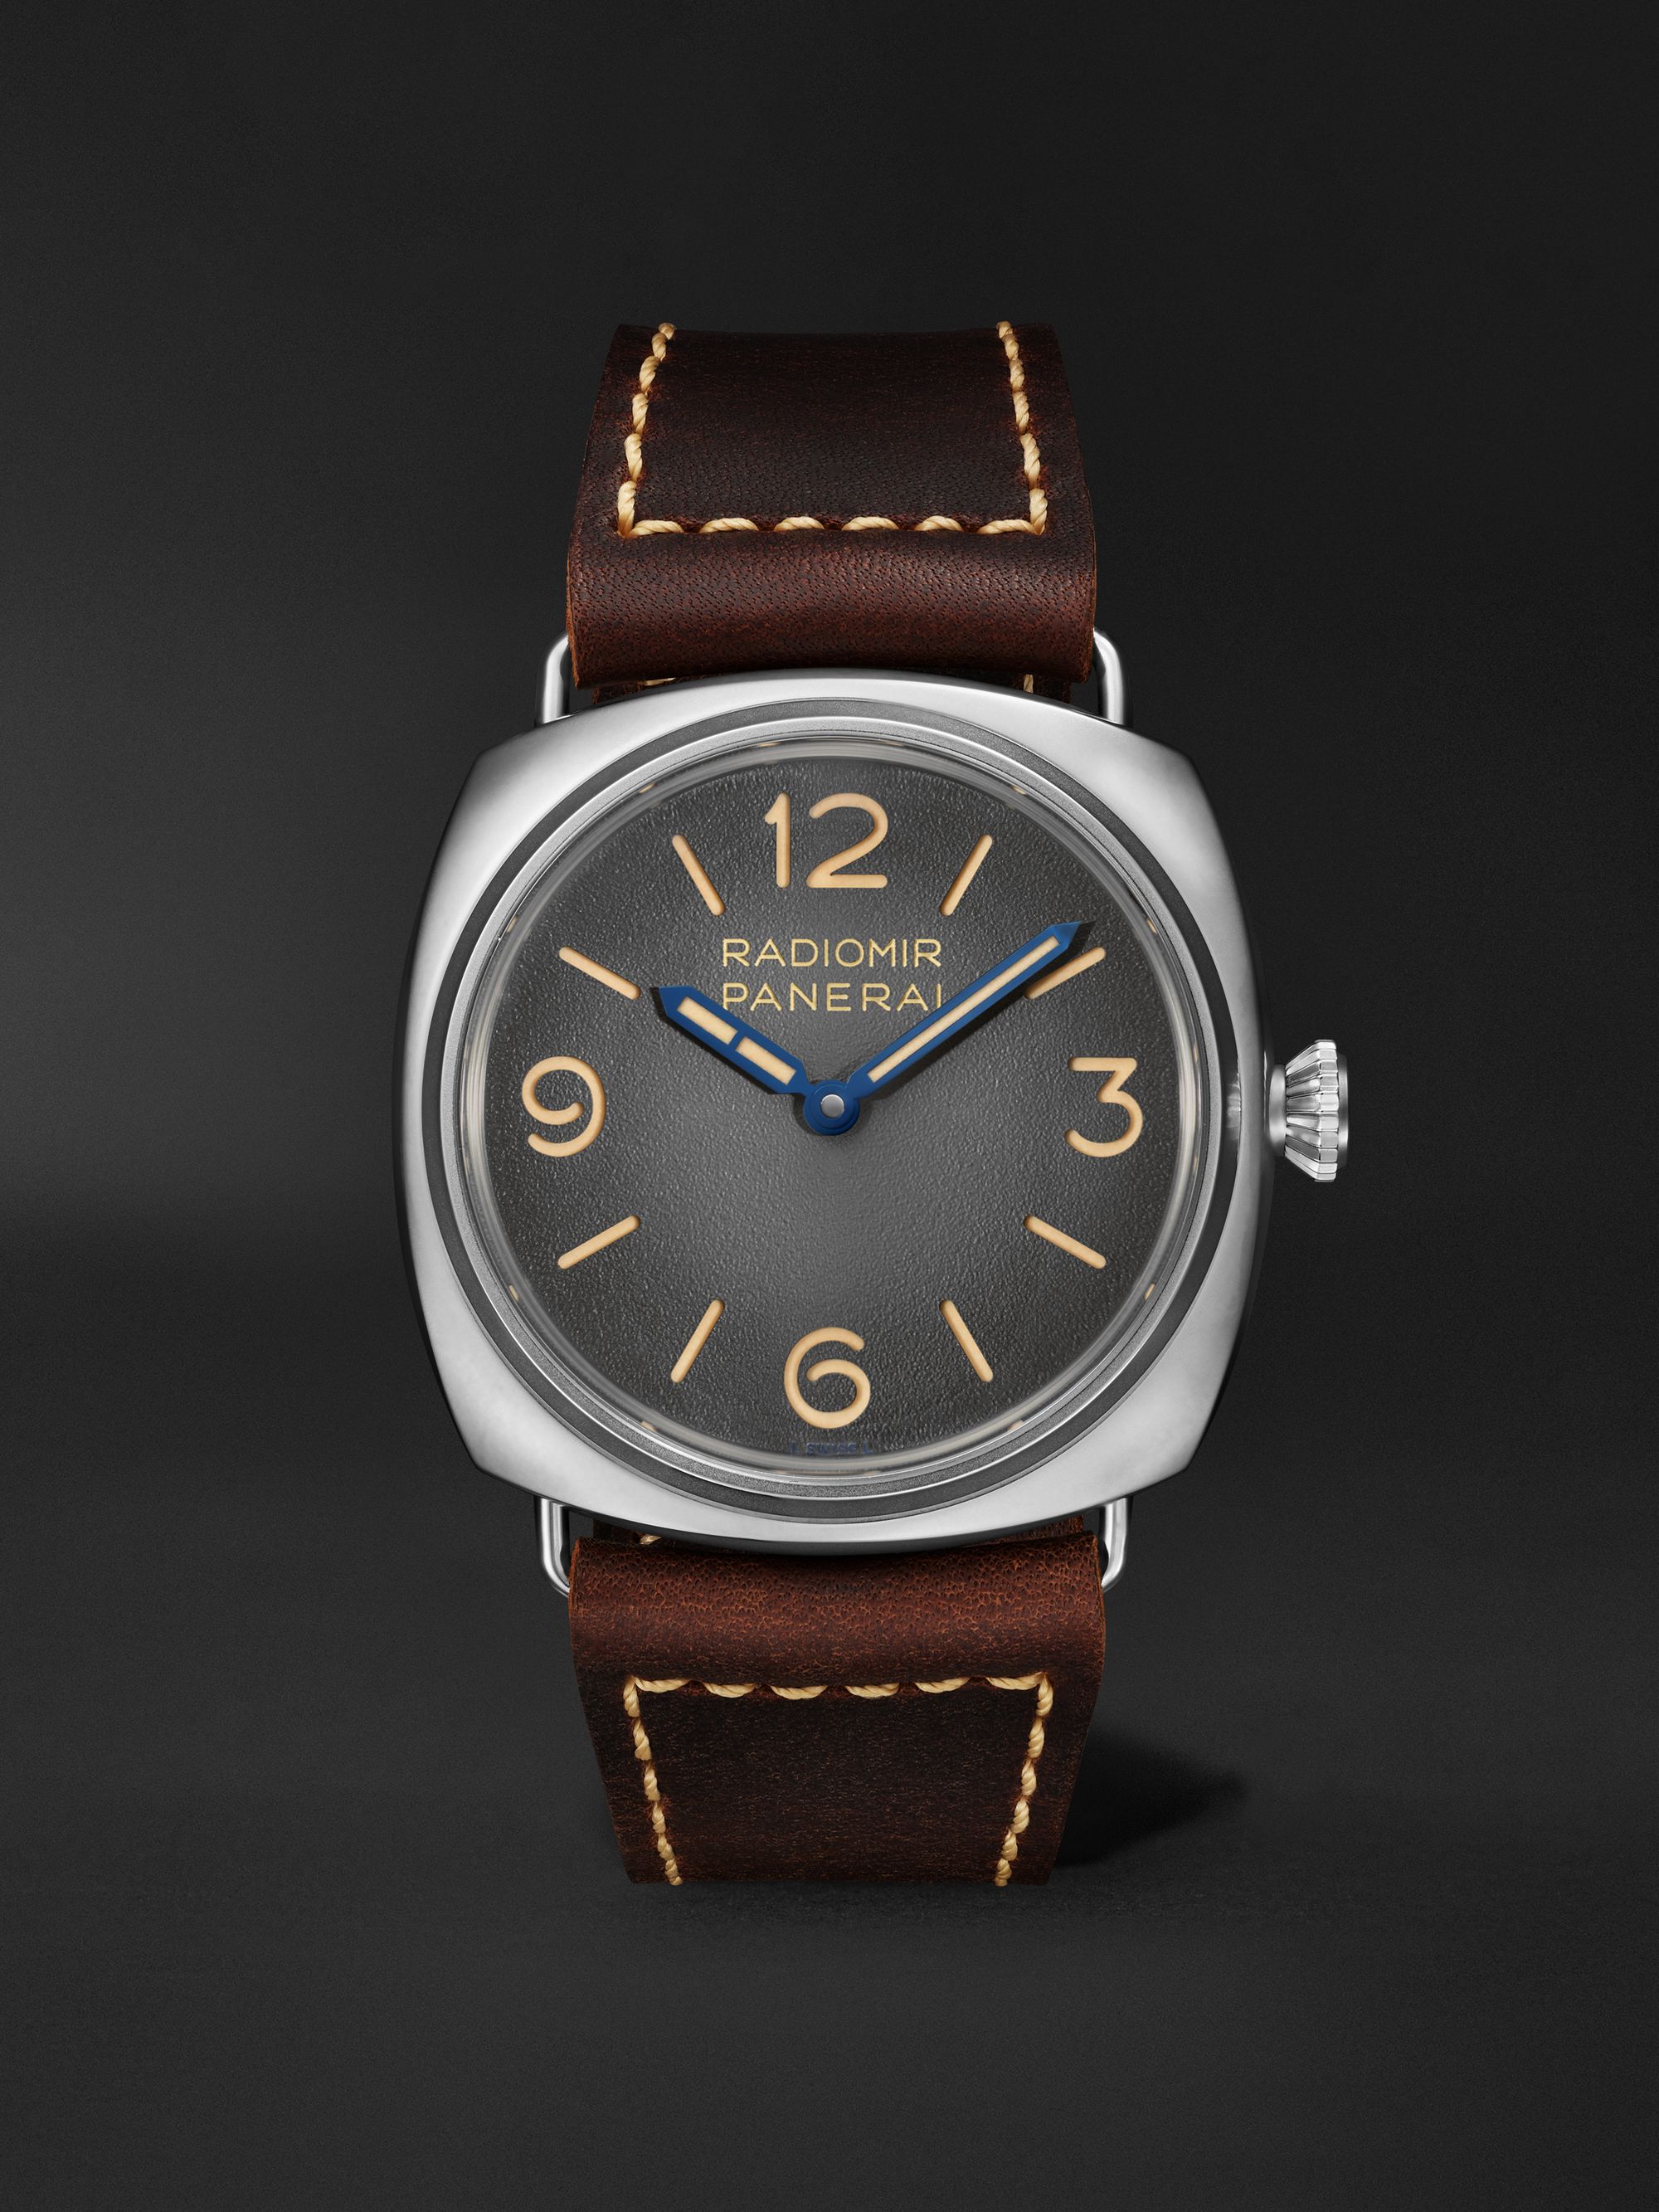 PANERAI Radiomir Origine Automatic 45mm Stainless Steel and Leather Watch, Ref. No. PAM01335